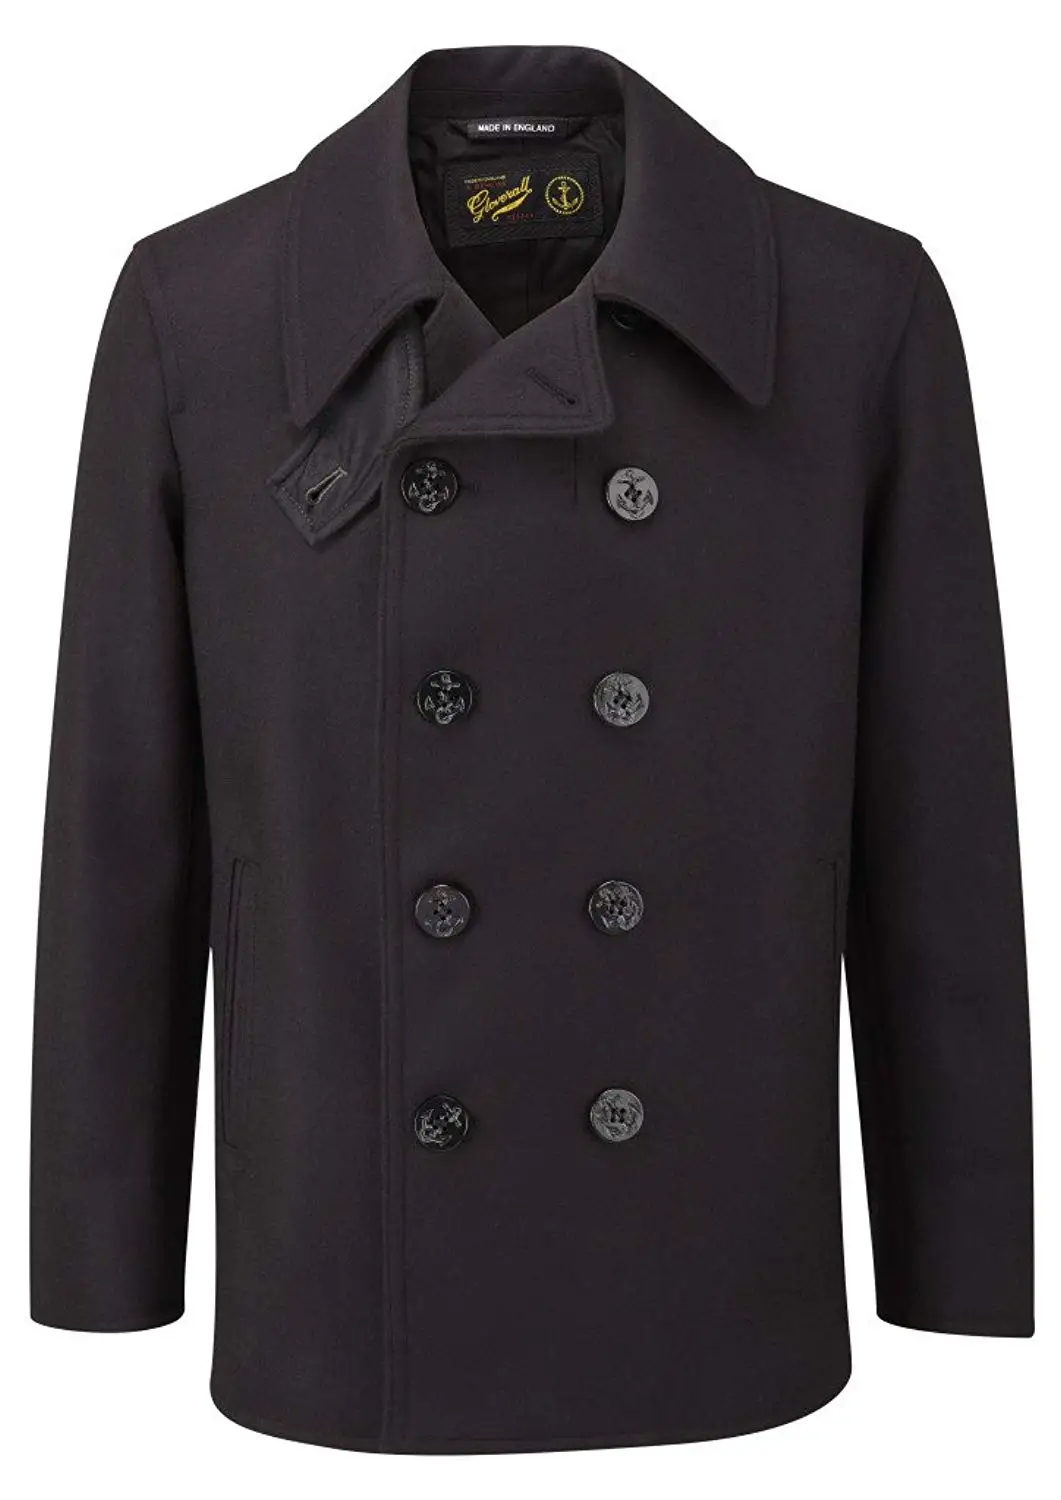 Buy Gloverall Churchill Reefer Coat in Cheap Price on Alibaba.com